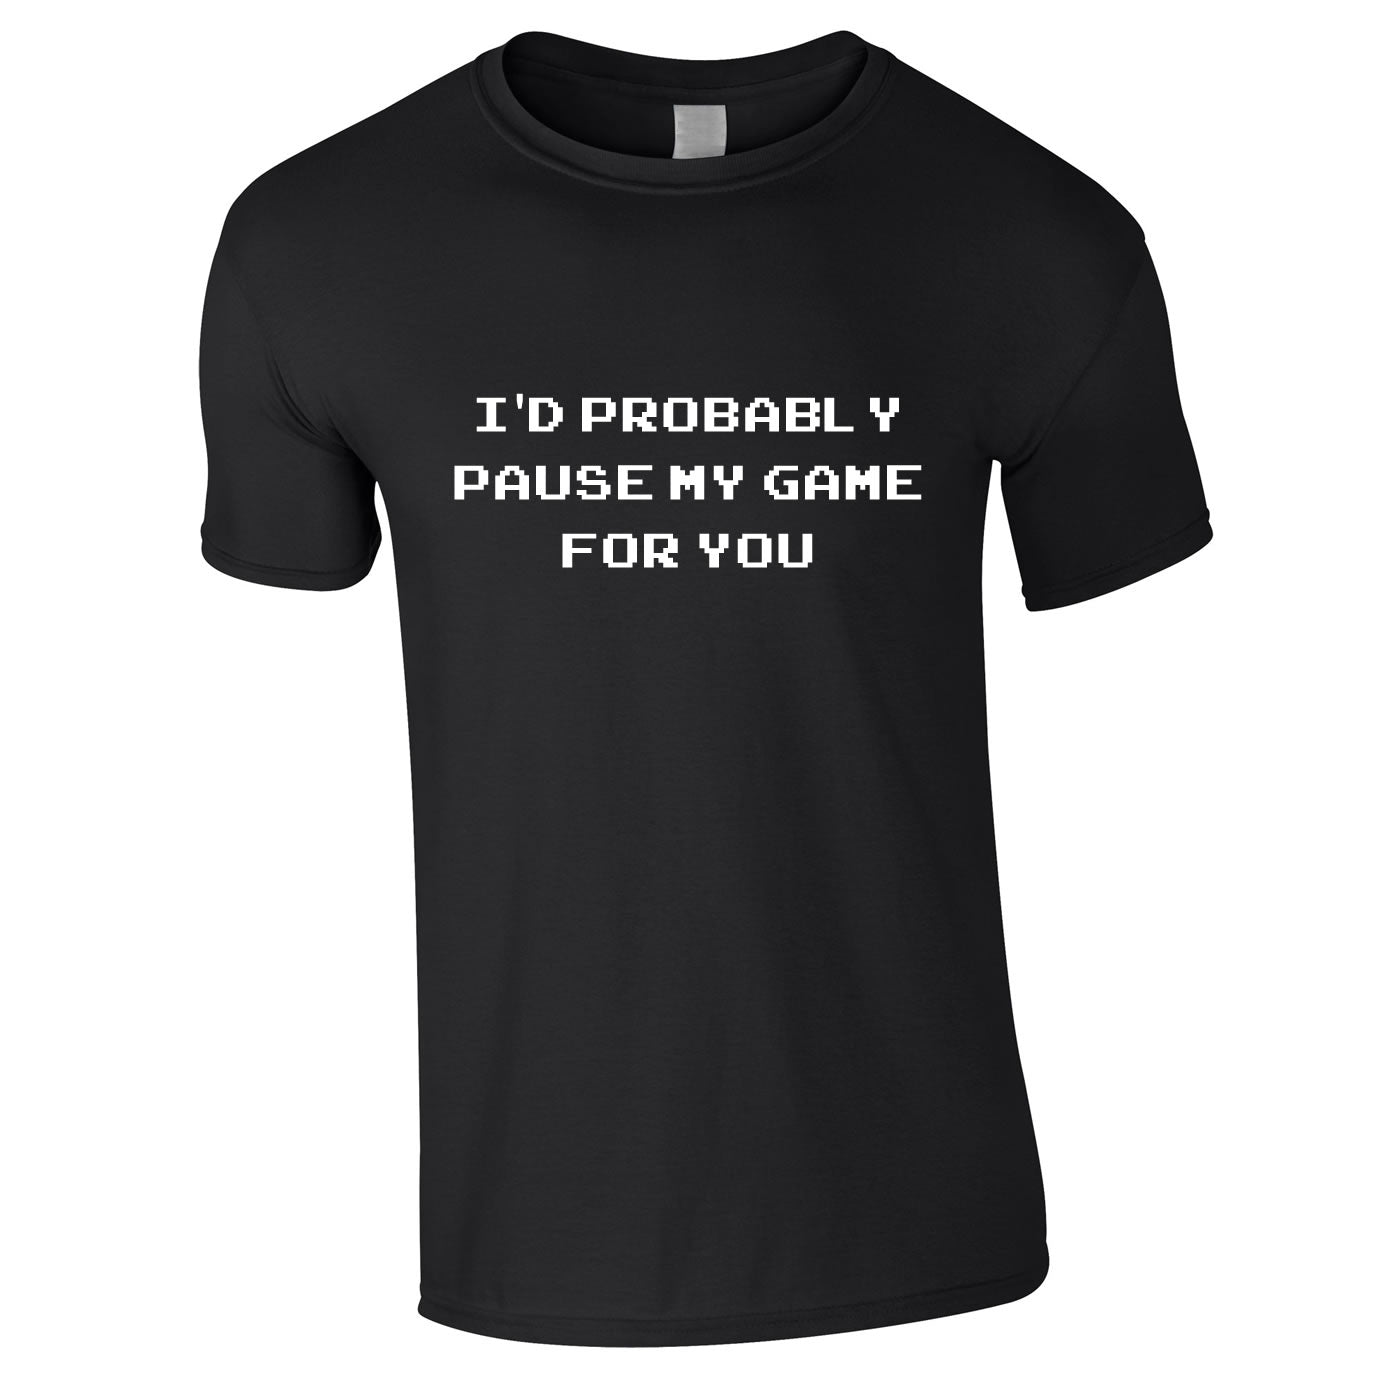 I'd Probably Pause My Game For You T Shirt